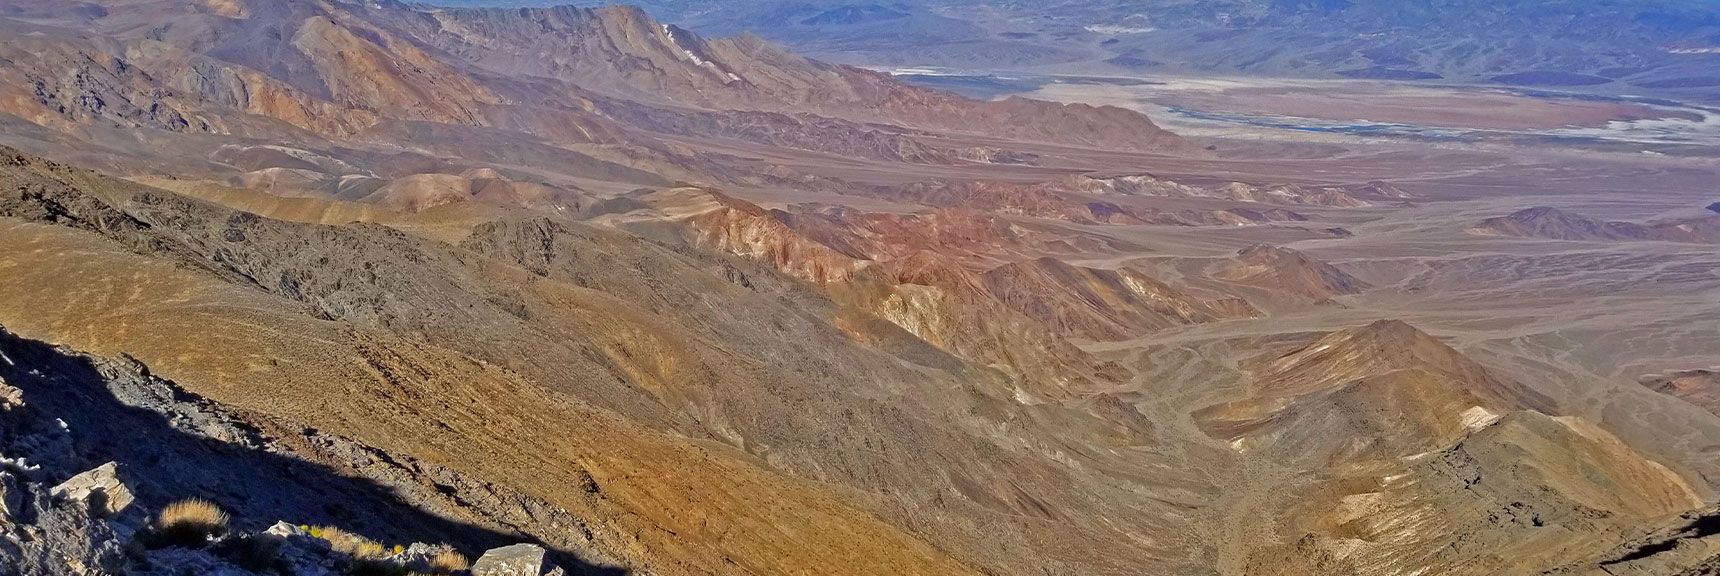 Northeastern Approach Canyon to Aguereberry Point | Aguereberry Point | Panamint Mountain Range | Death Valley National Park, California